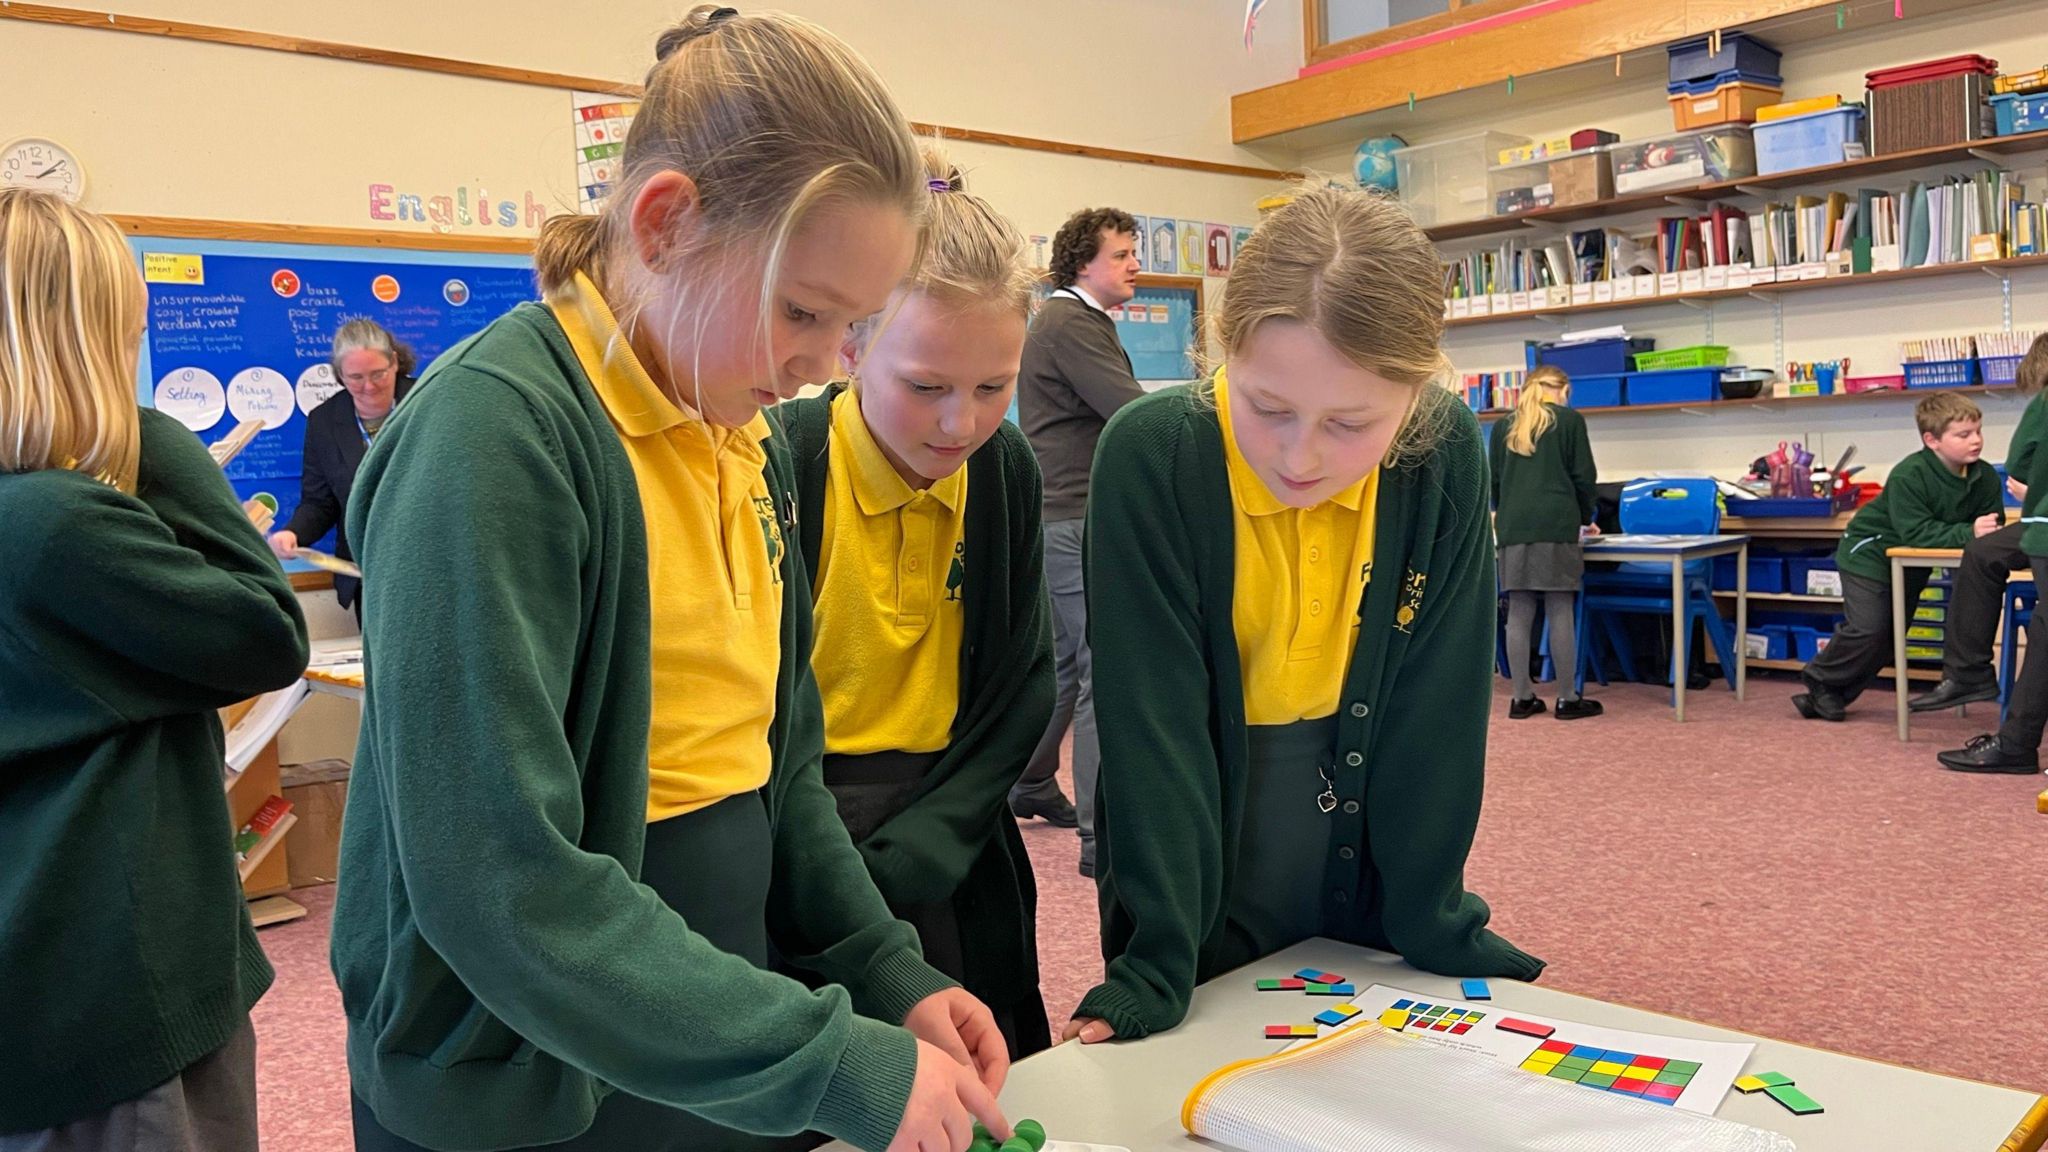 Year 5 pupils at Forest Primary School, Guernsey, looking at a maths puzzle